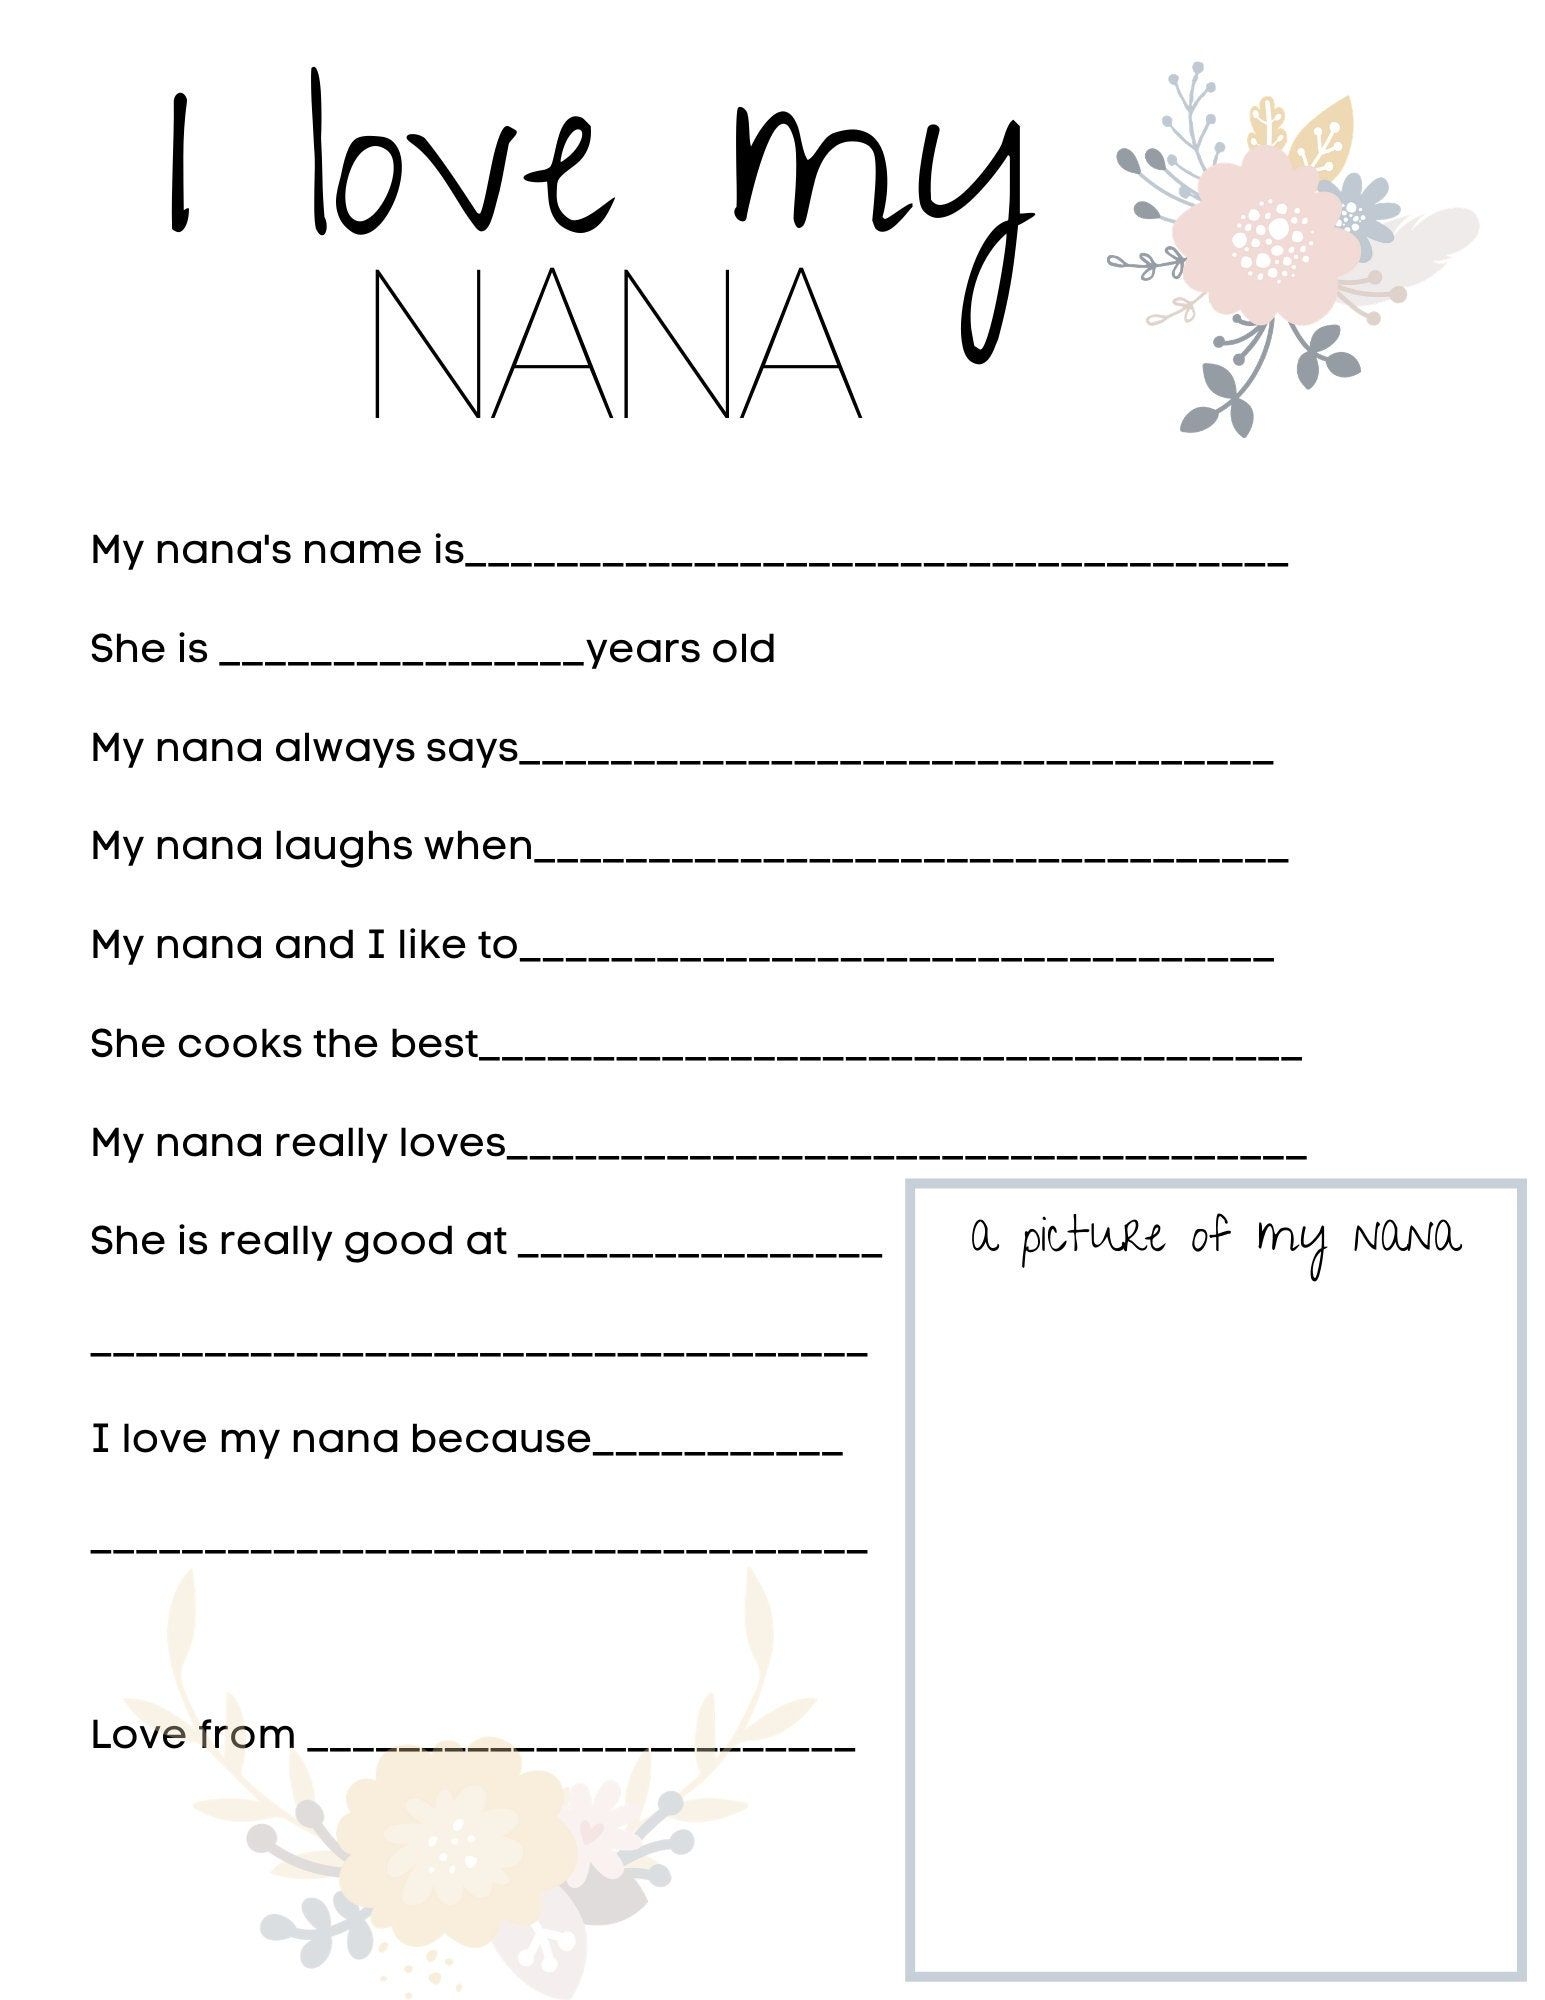 I LOVE MY NANA Mother s Day Questionnaire Survey Etsy Canada Cute Mothers Day Gifts Easy Diy Mother s Day Gifts Mother s Day Activities